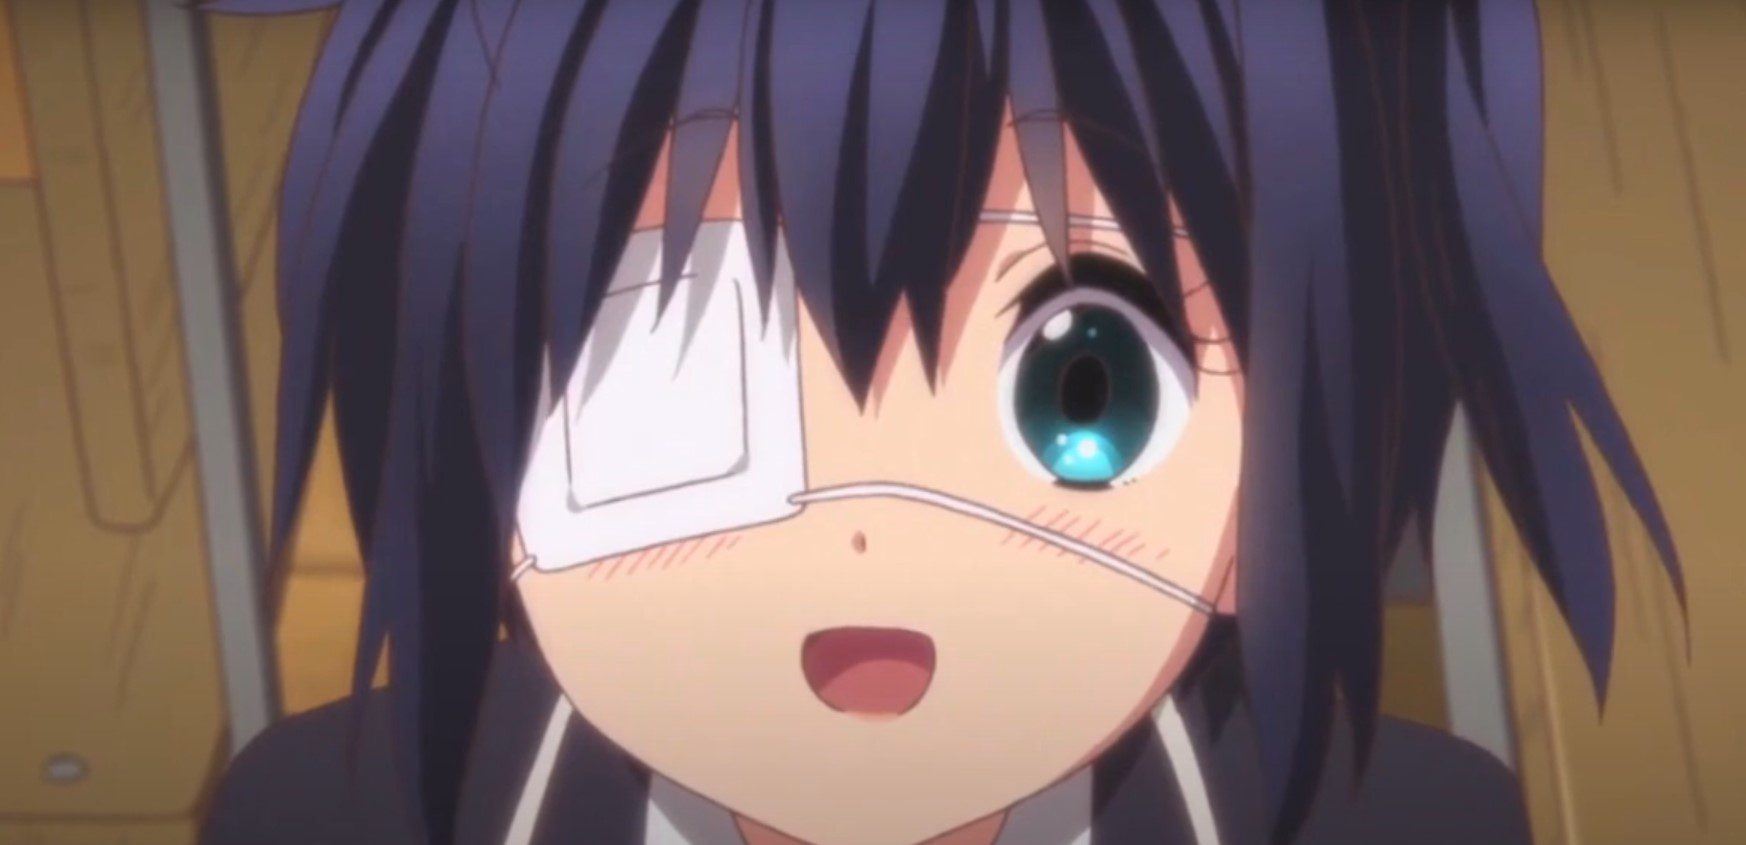 Love Chunibyo & Other Delusions Watch Order